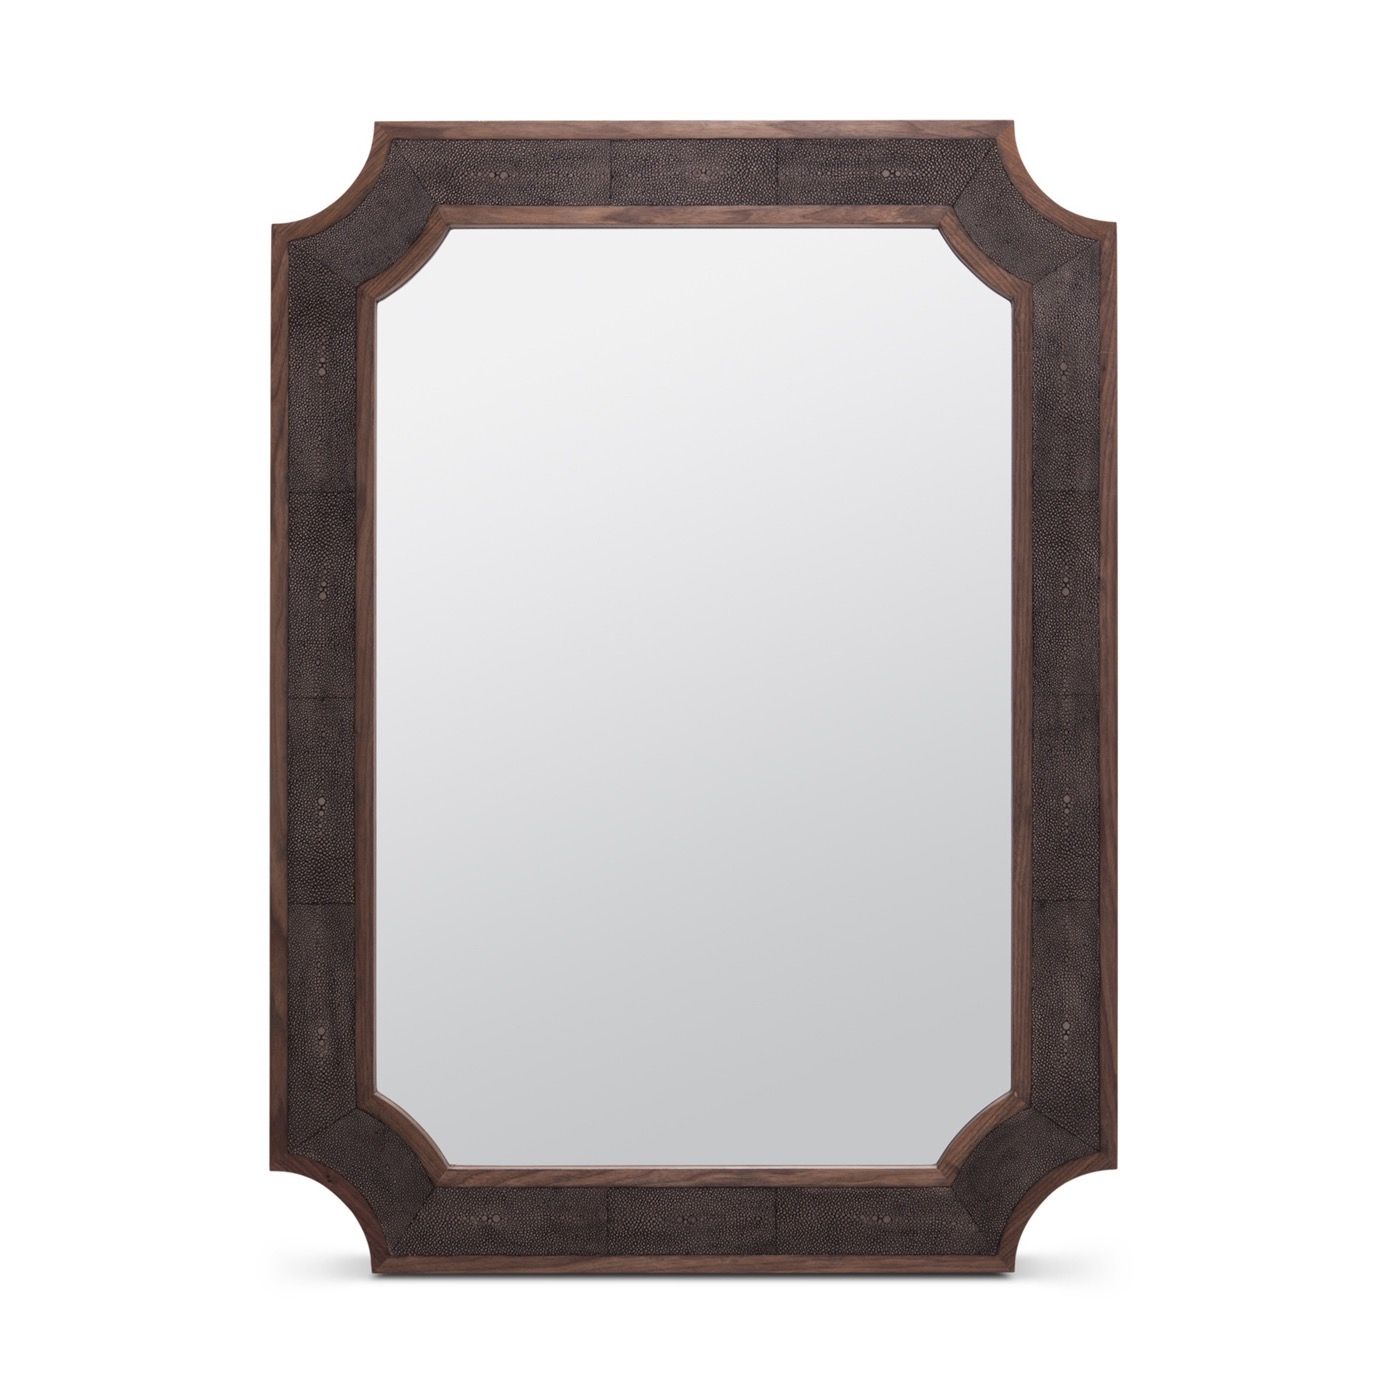 Patterson Wall Mirror | Brown | Plantation Design Intended For Chestnut Brown Wall Mirrors (View 2 of 15)